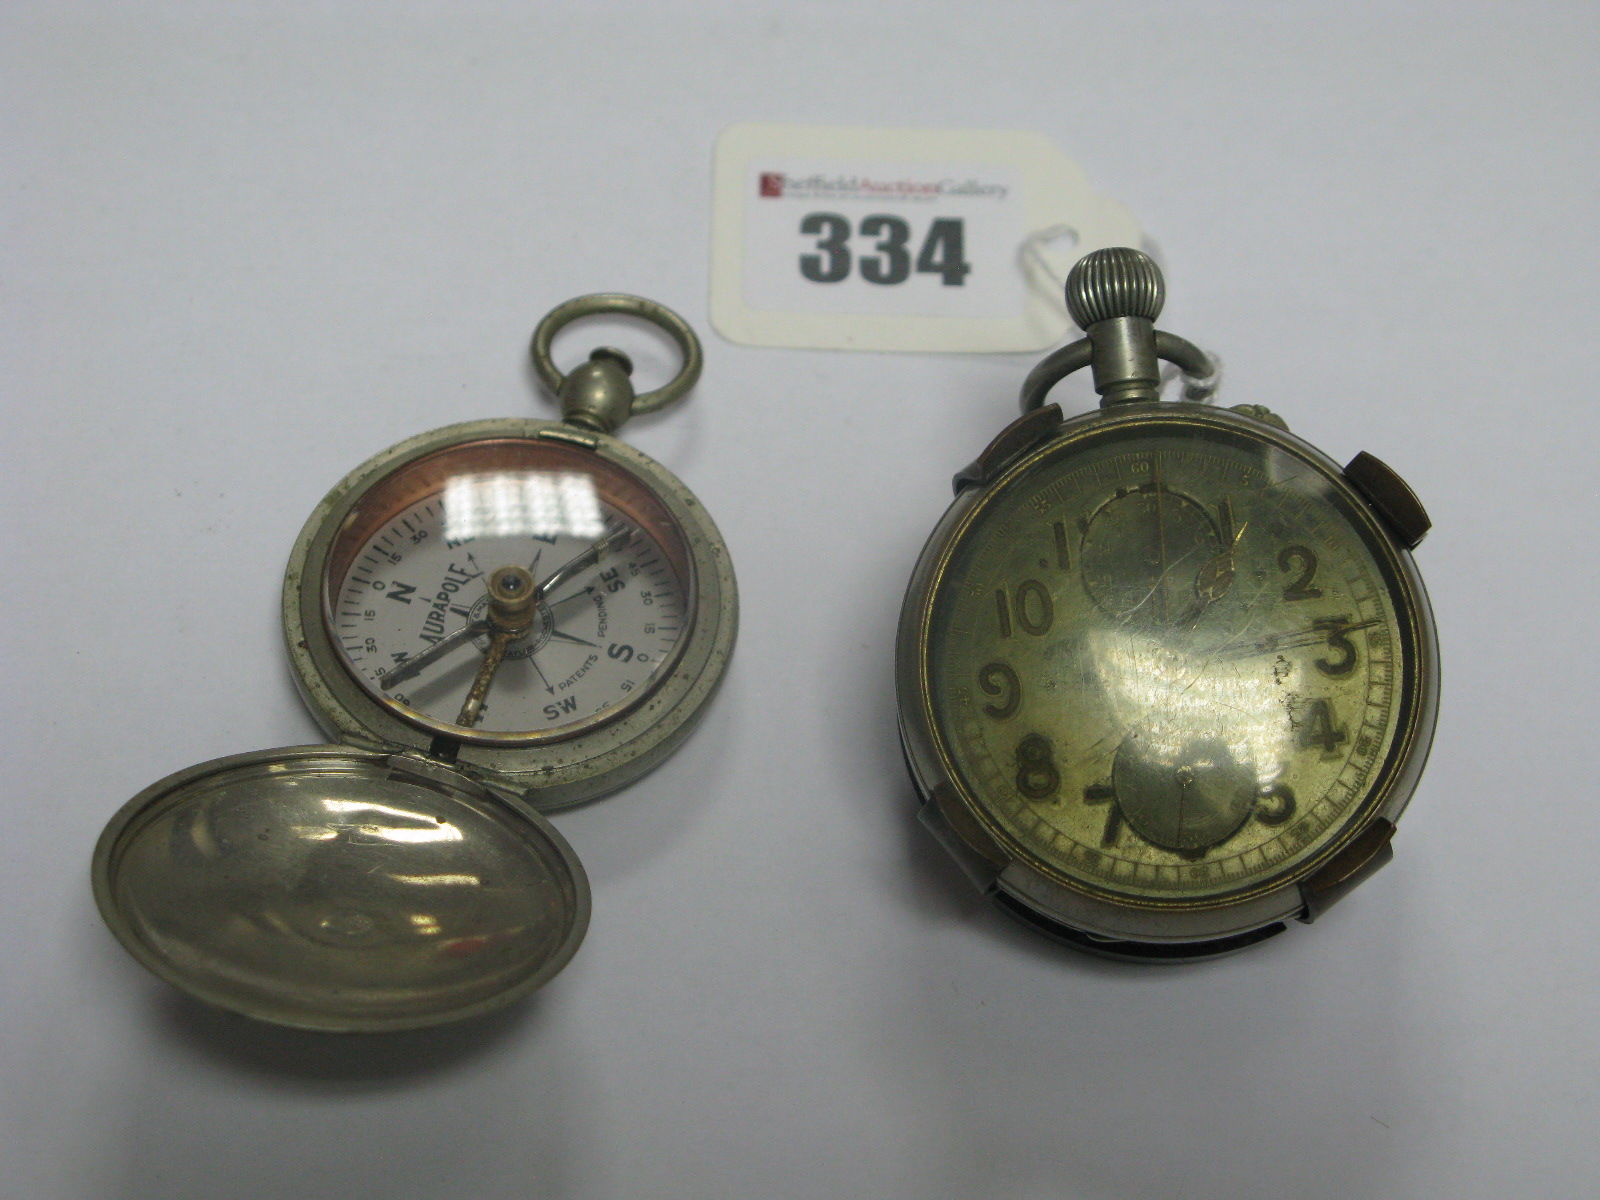 A WWII Period Pocket Watch with Aircraft Mounting, no makers mark or WD arrow, however inscribed